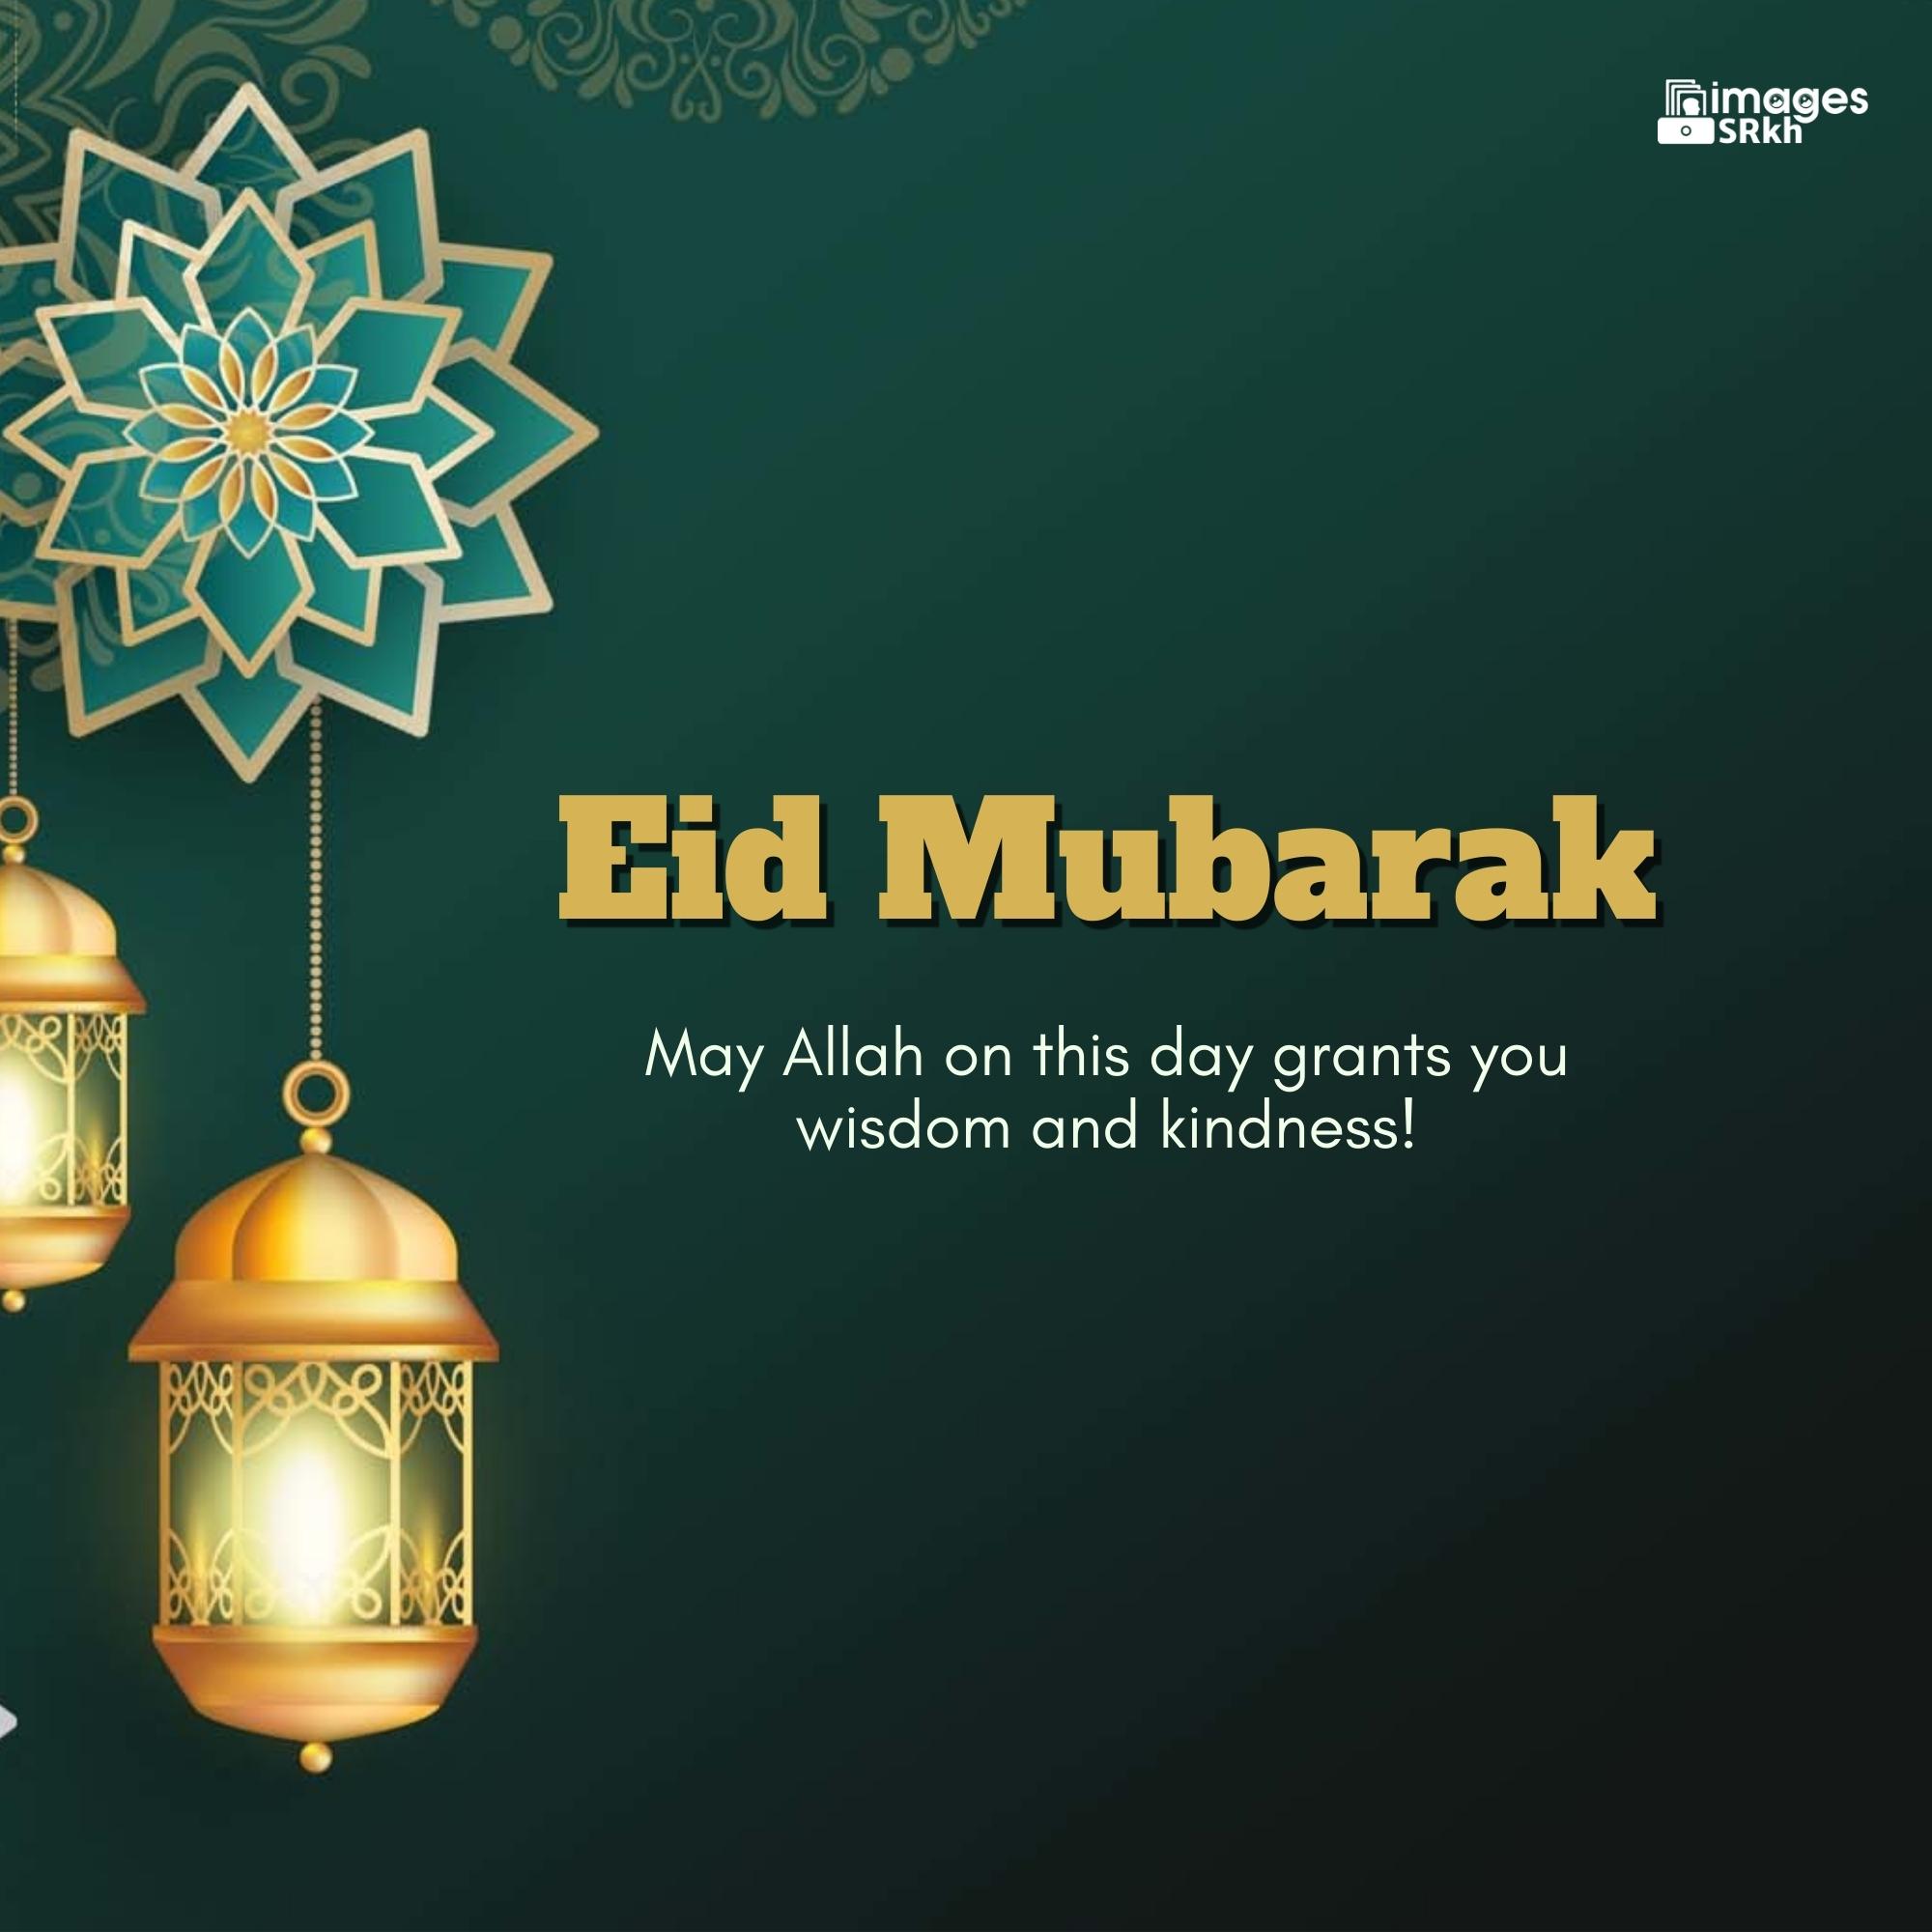 Wishes To Eid Mubarak (5) | Download free in Hd Quality | imagesSRkh